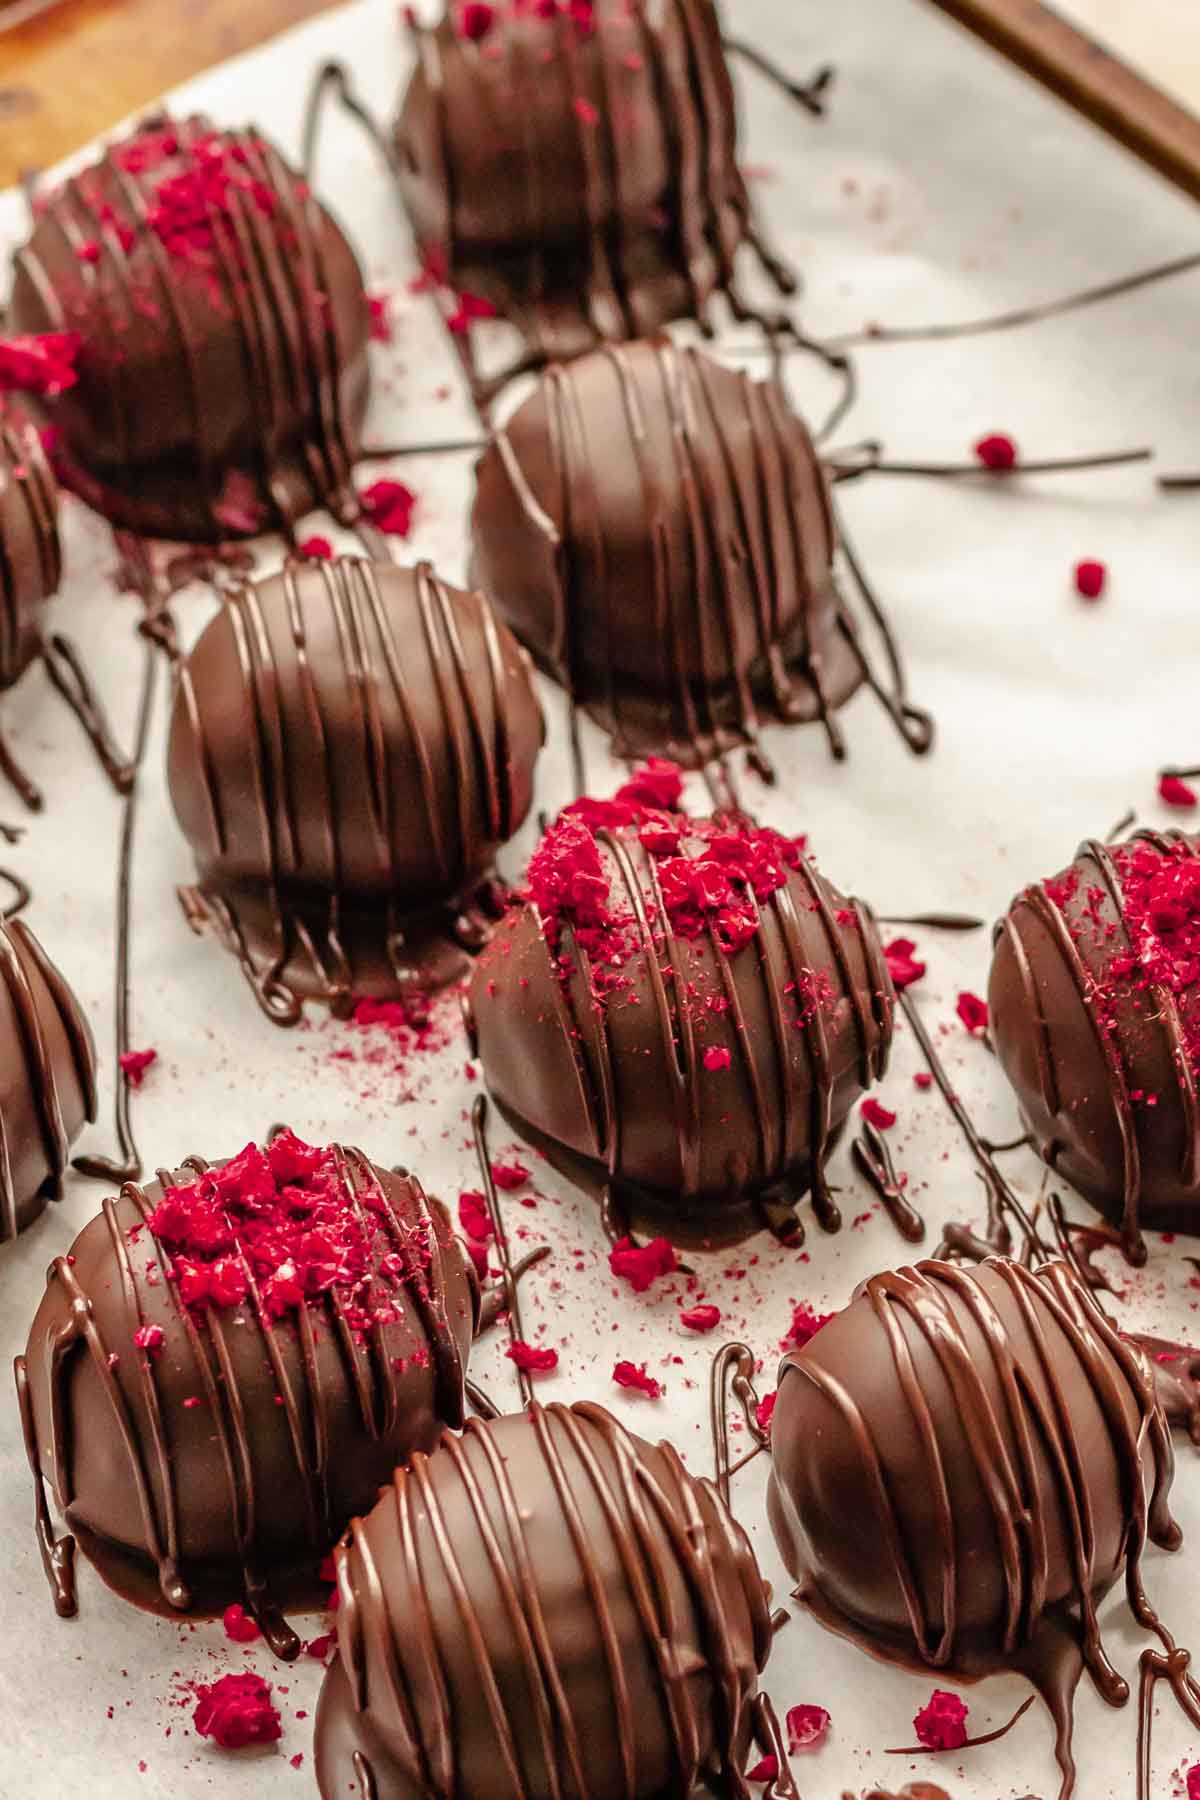 Chocolate raspberry truffles on a sheet pan. Some have freeze dried raspberry crumbles on top.